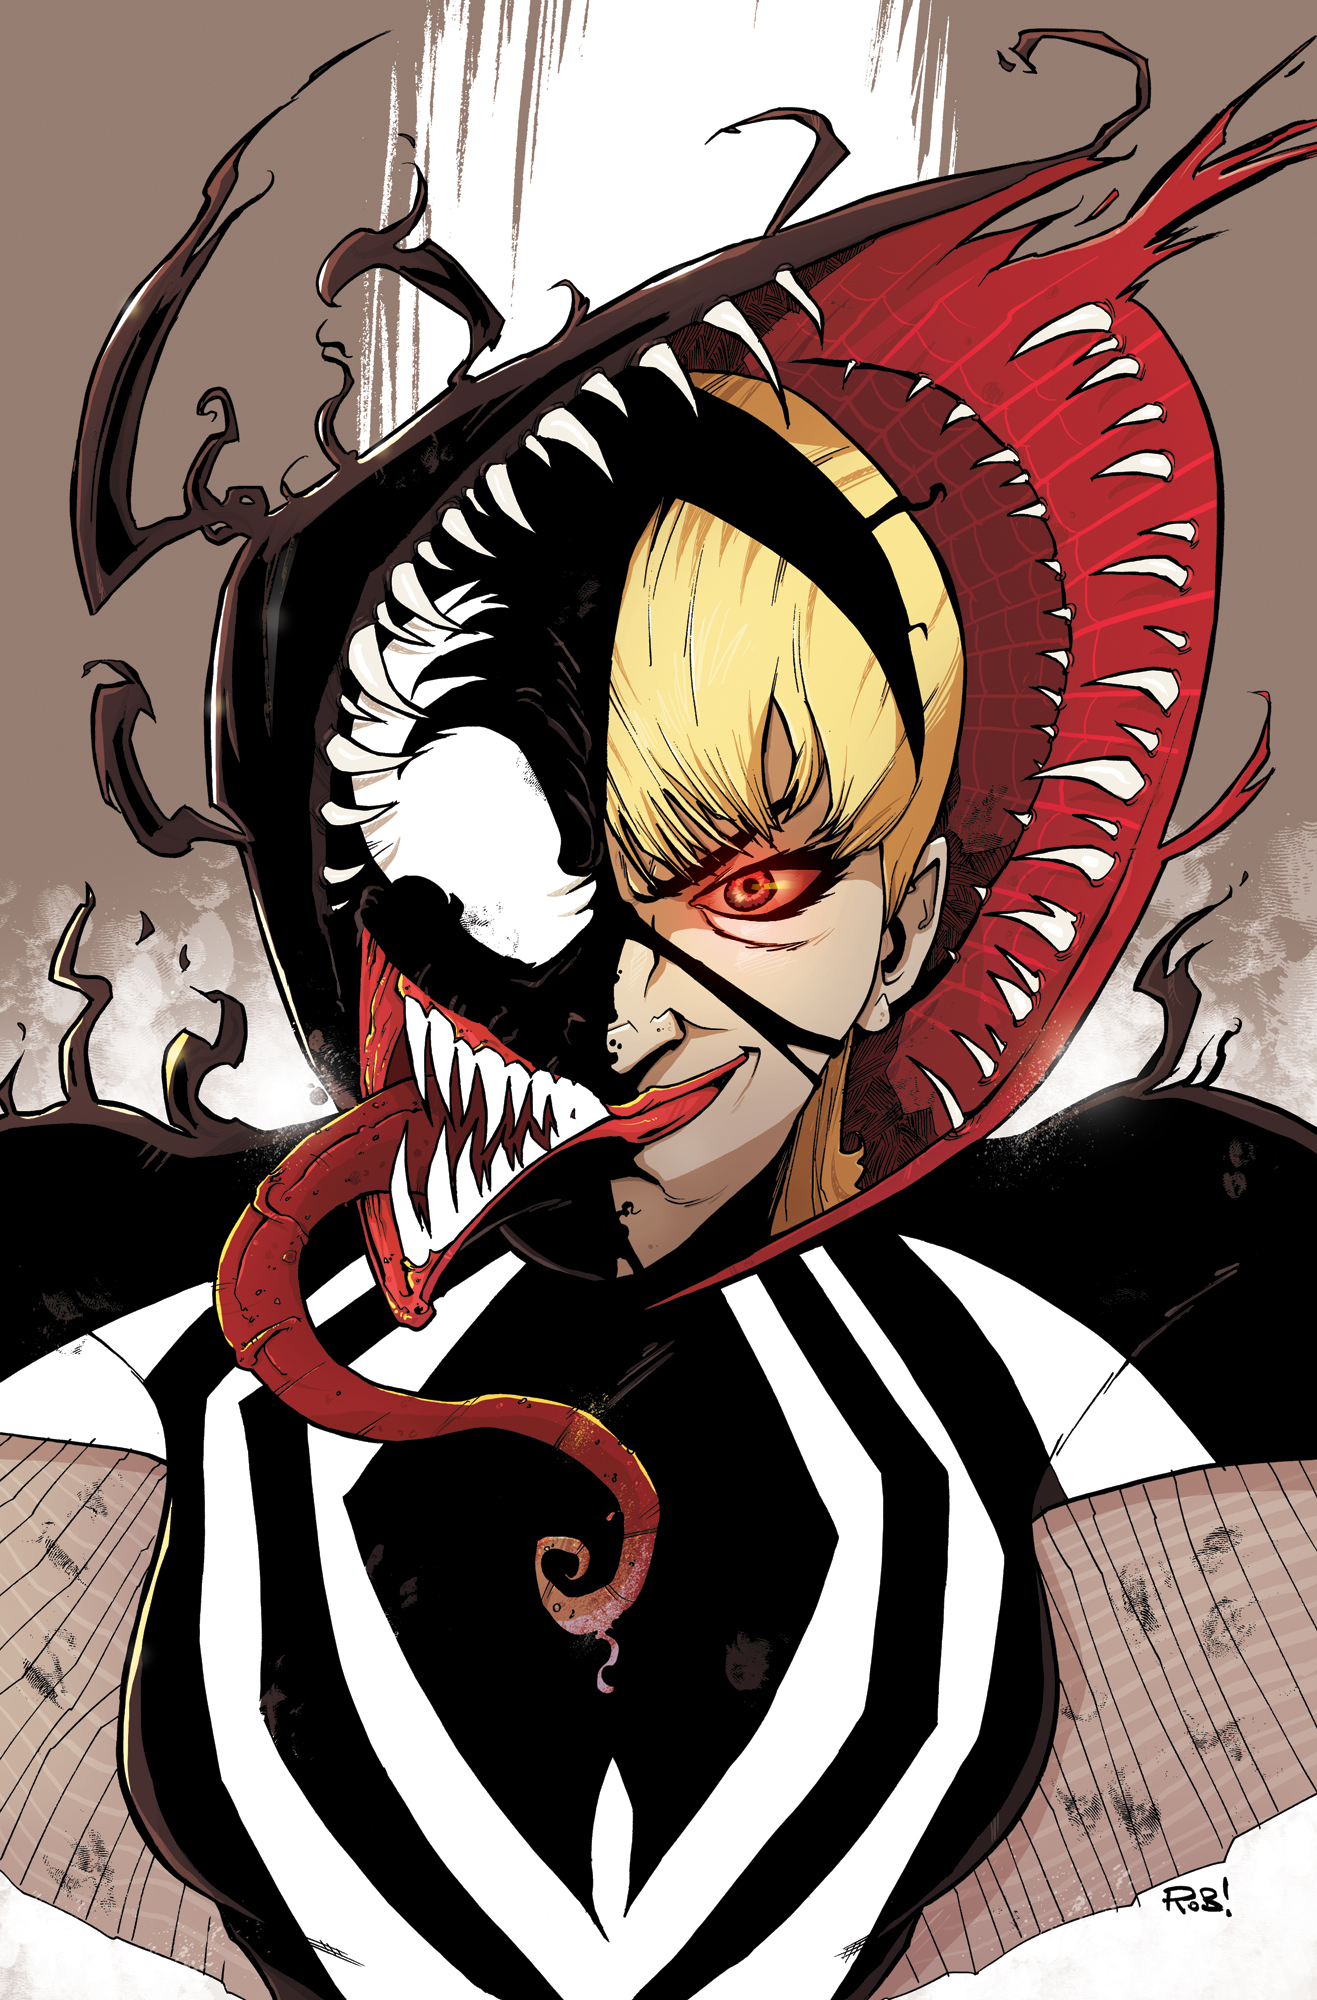 Gwenom Variant by ROB GUILLORY